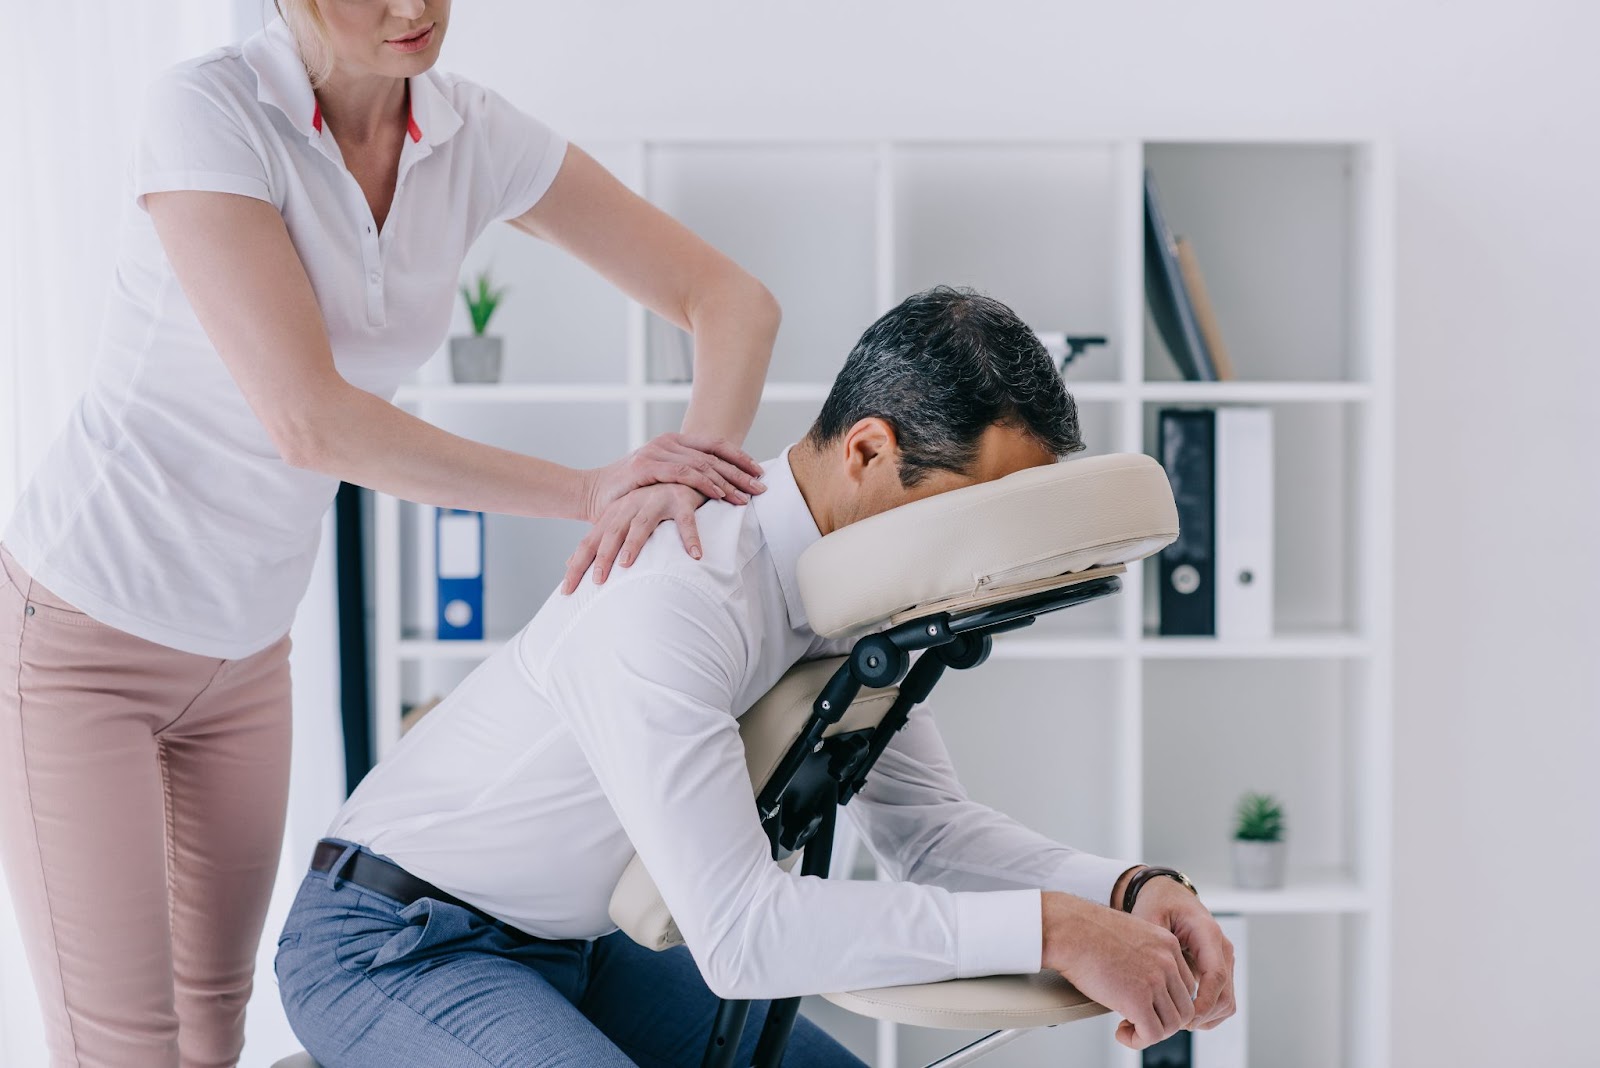 company holiday party ideas: corporate massage for employees